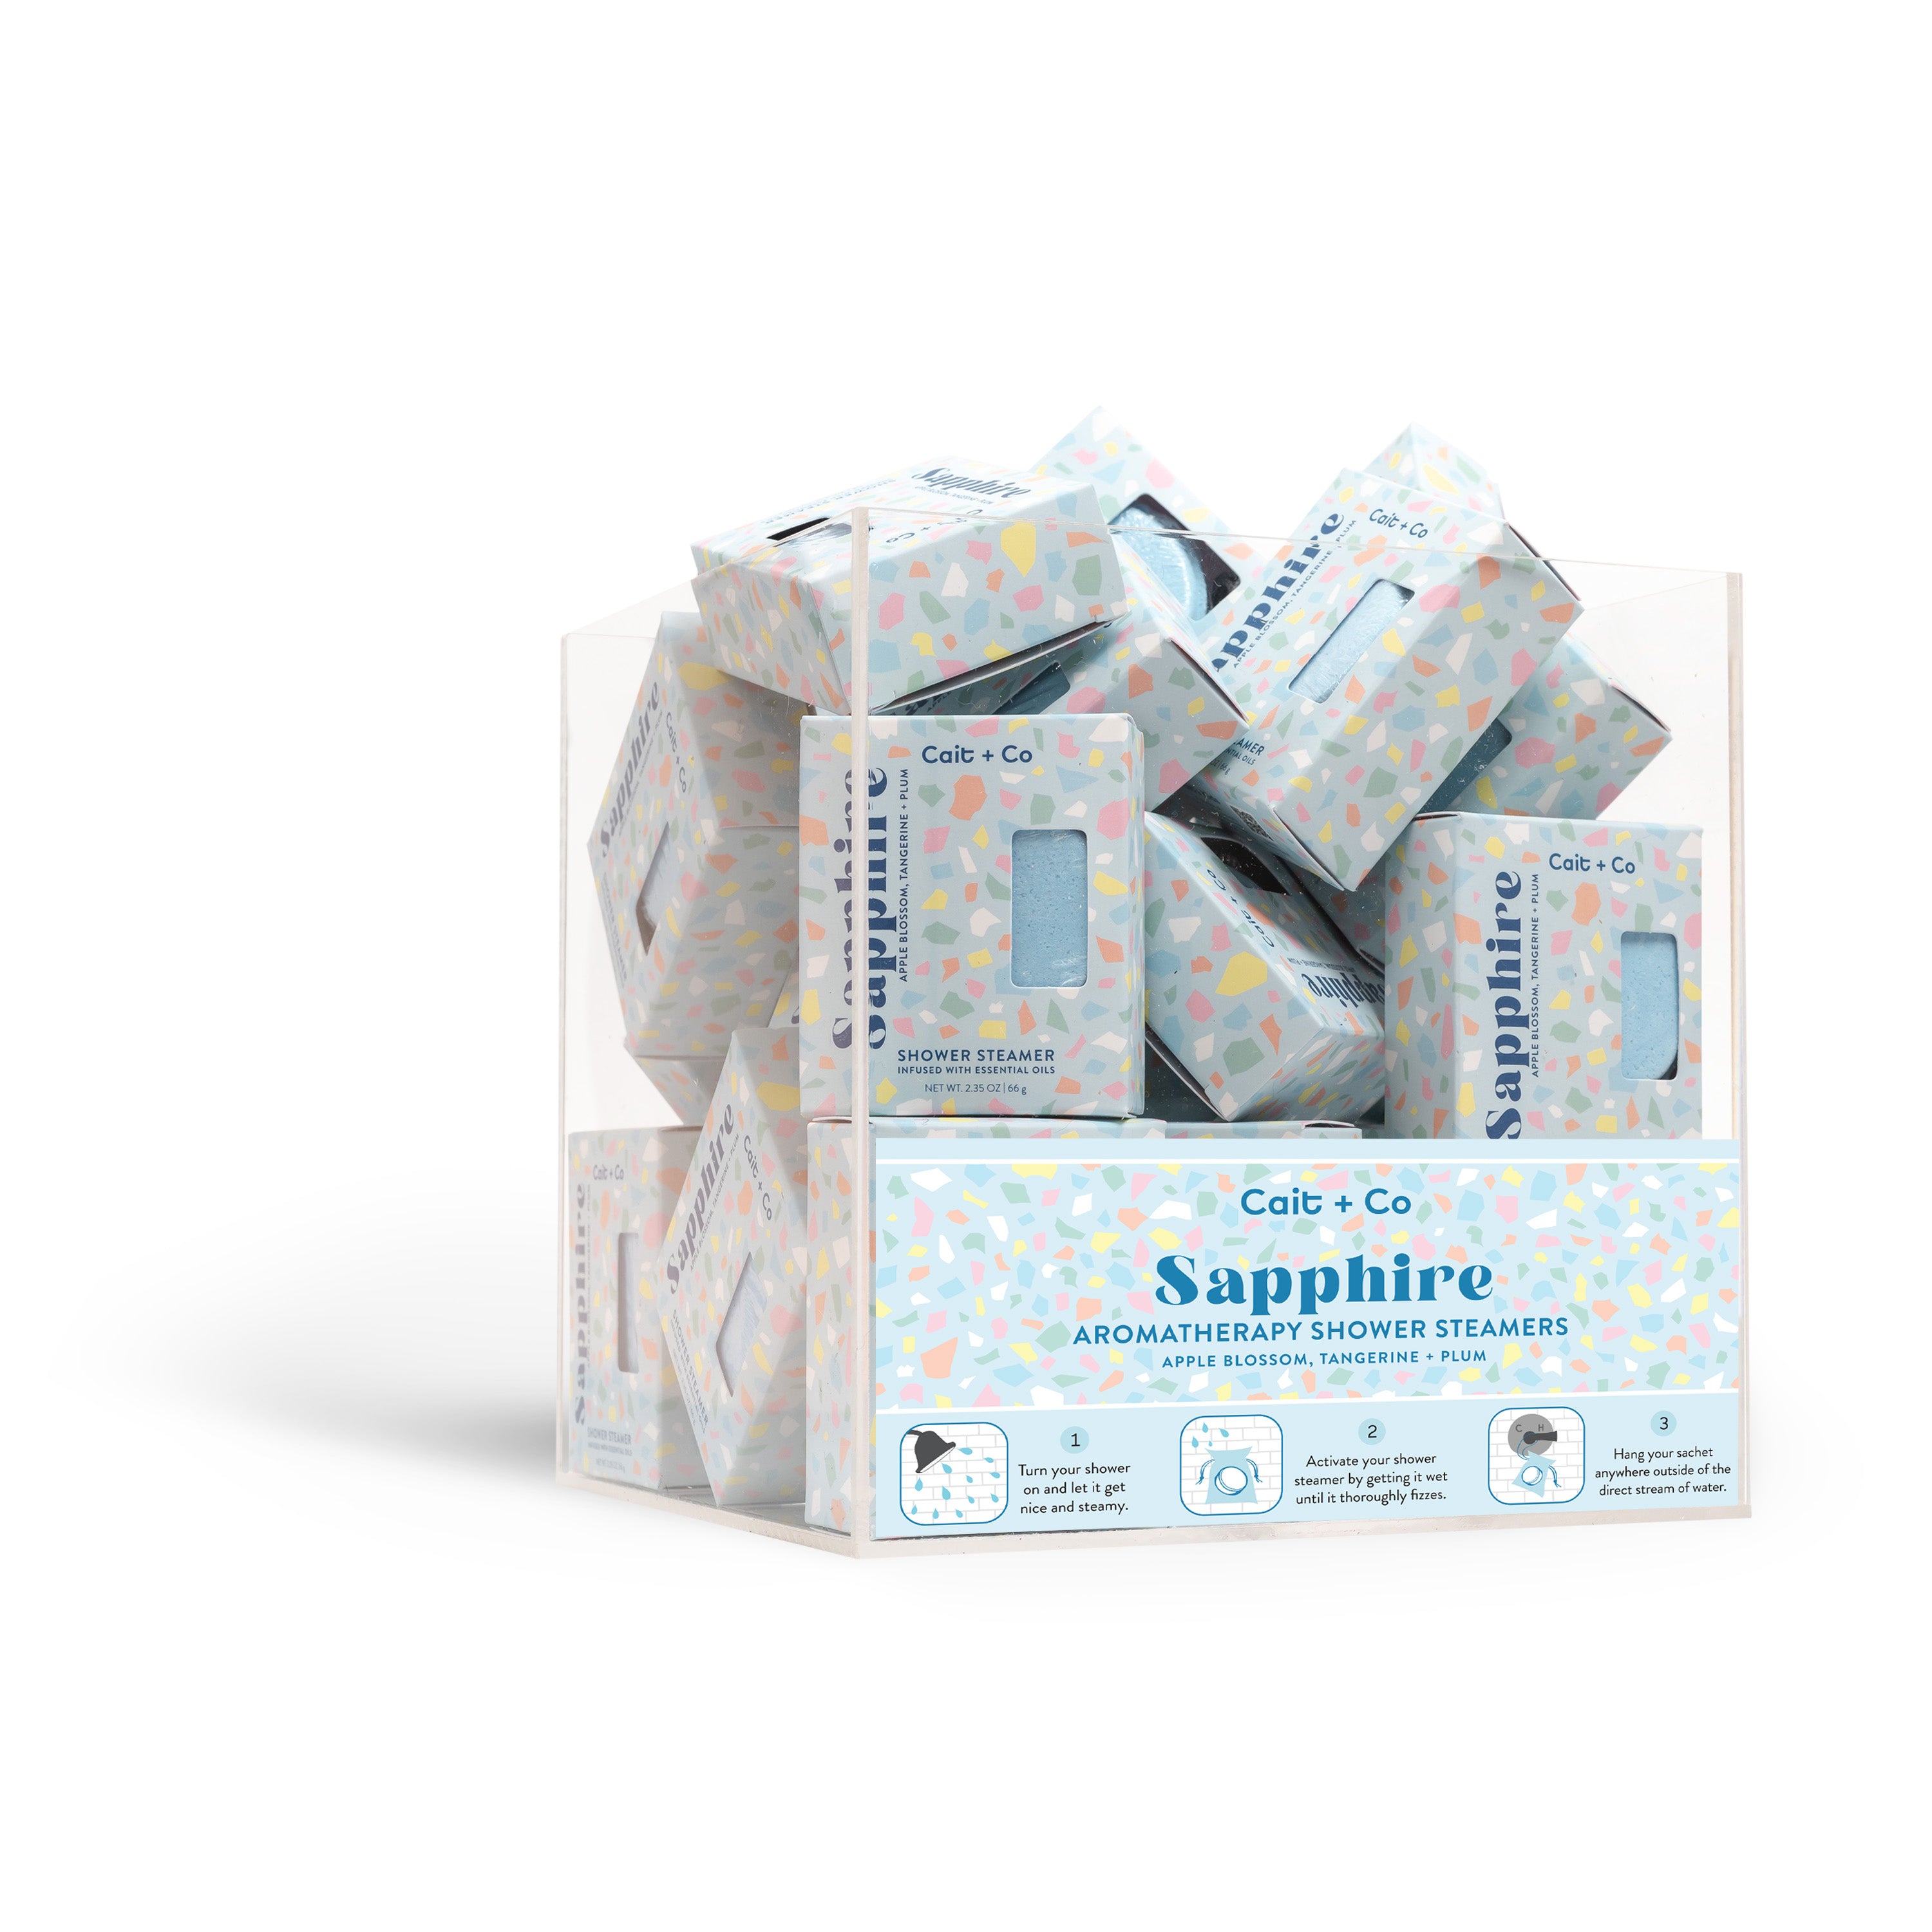 Sapphire - Aromatherapy Shower Steamer Cube Display